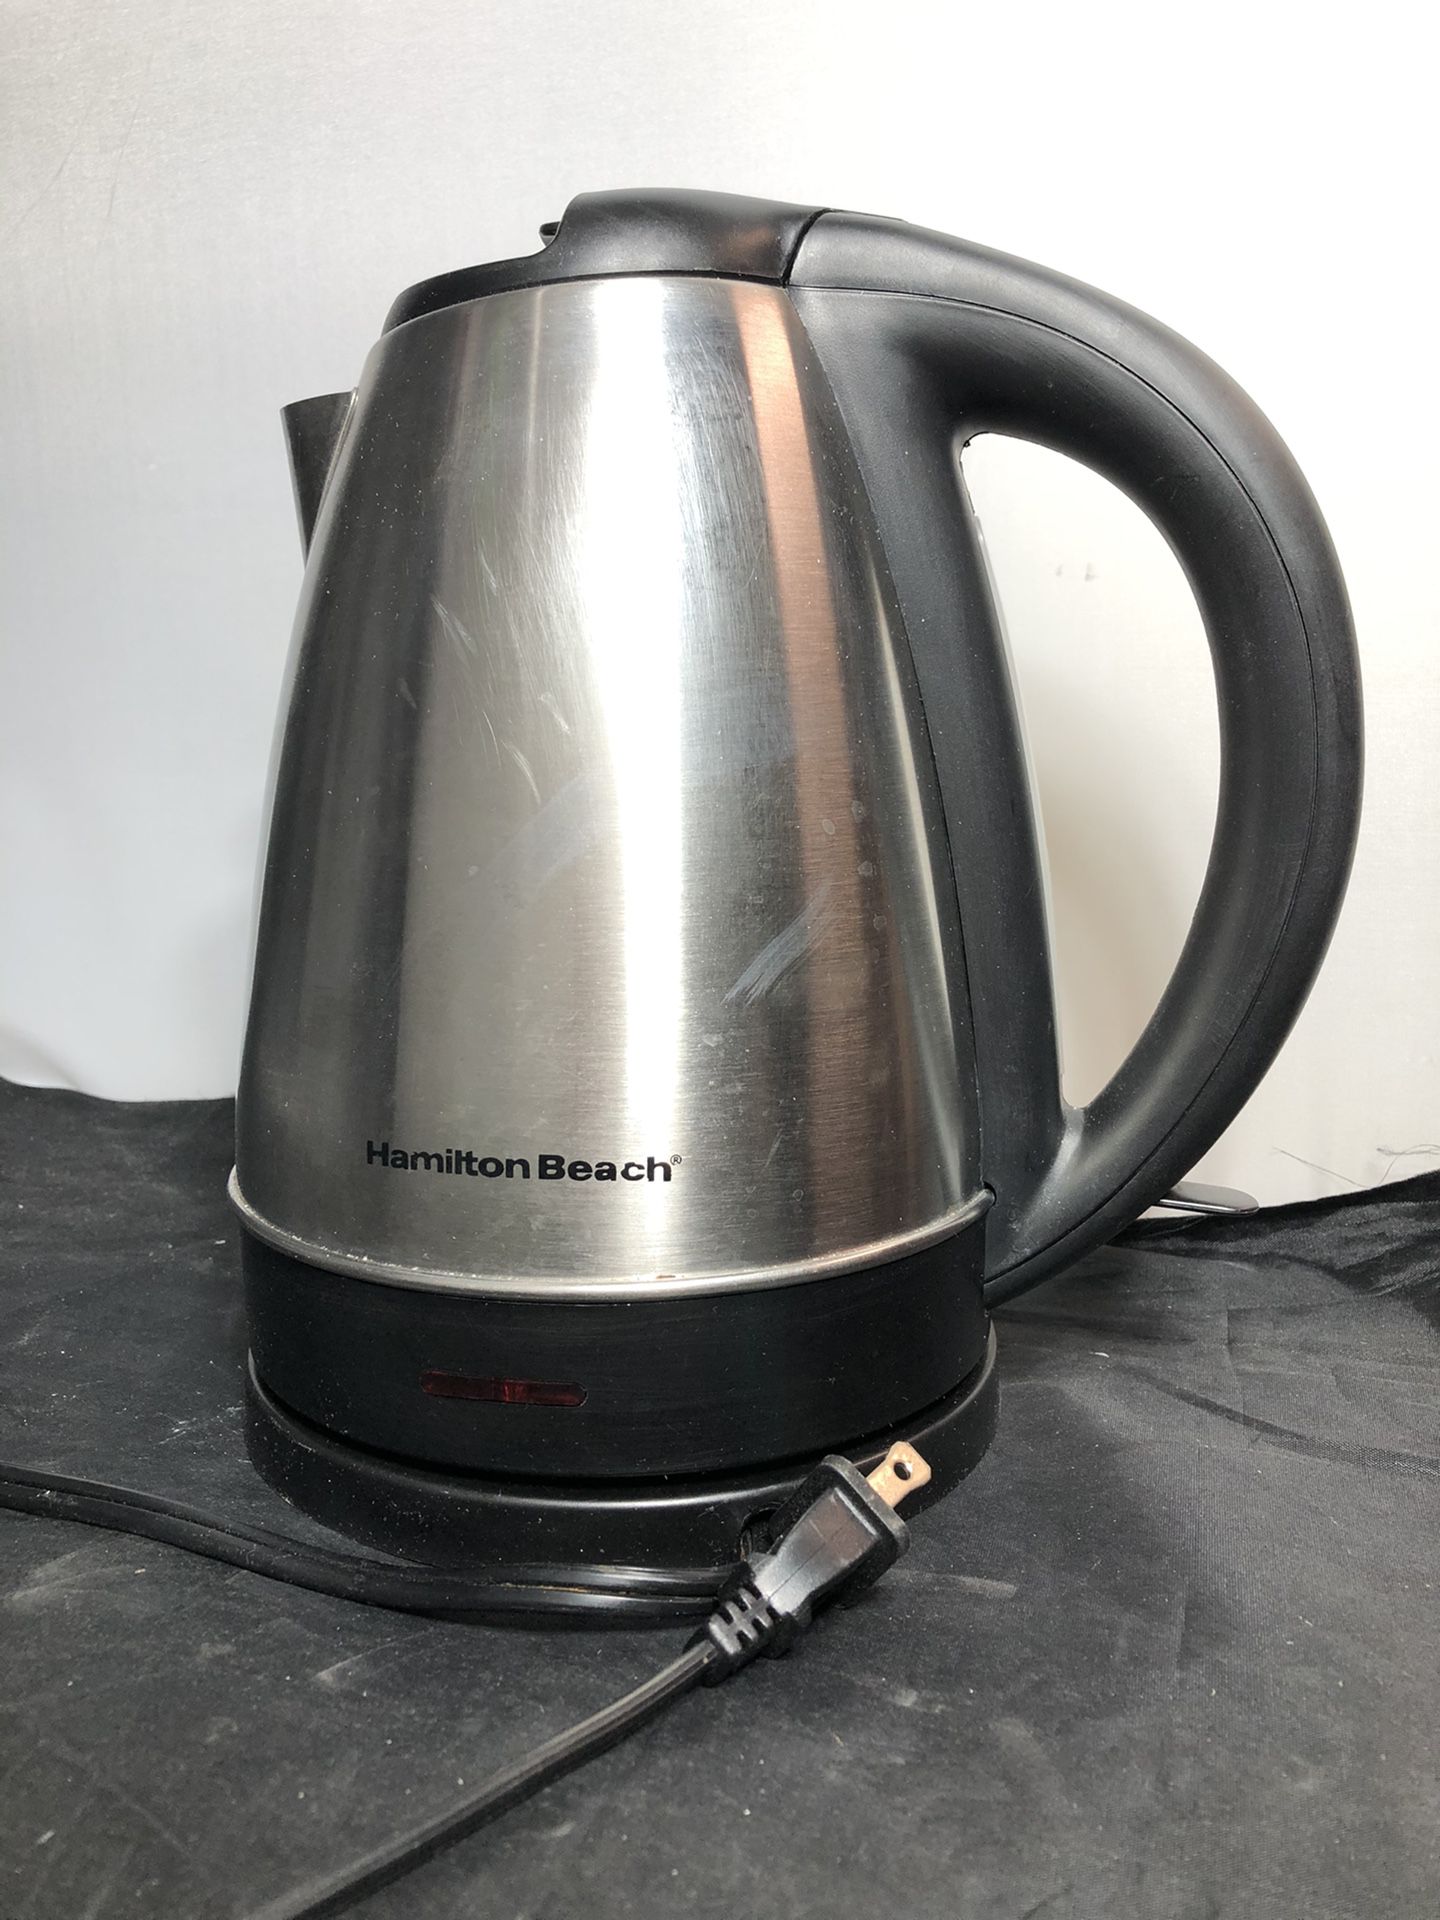 Secura Electric kettle for Sale in New York, NY - OfferUp